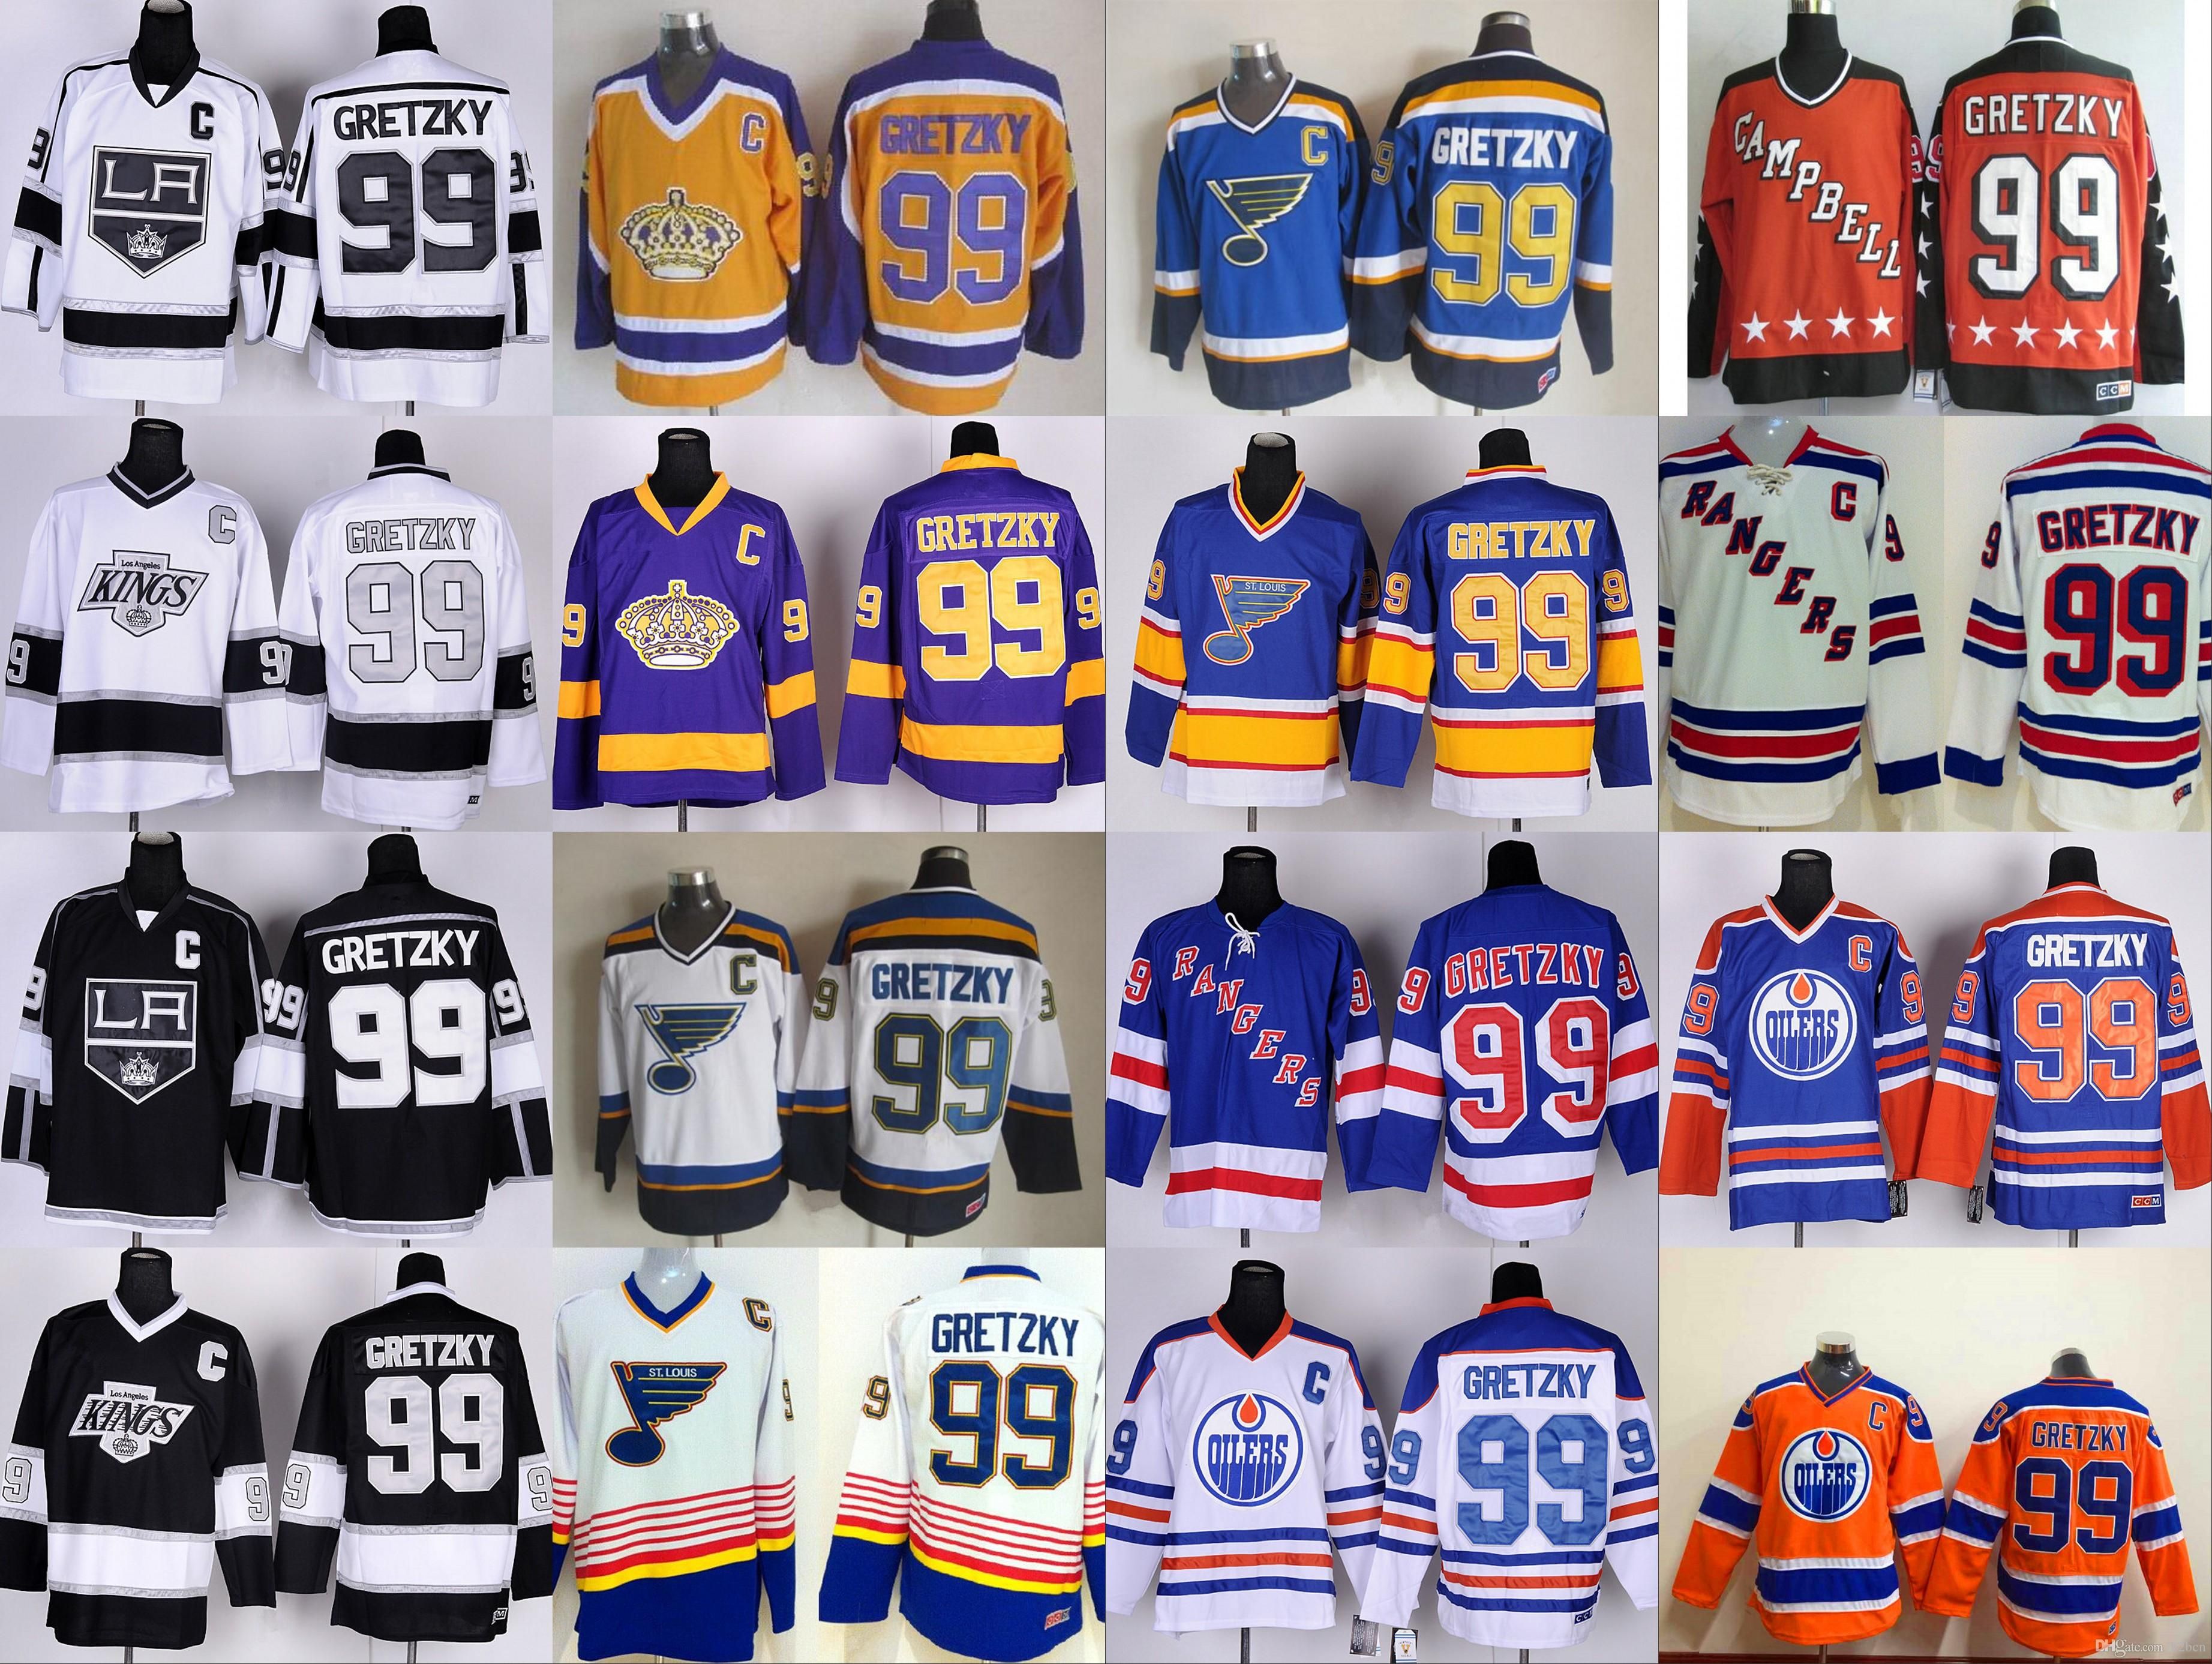 Los Angeles Kings #99 Wayne Gretzky Yellow Jersey on sale,for  Cheap,wholesale from China